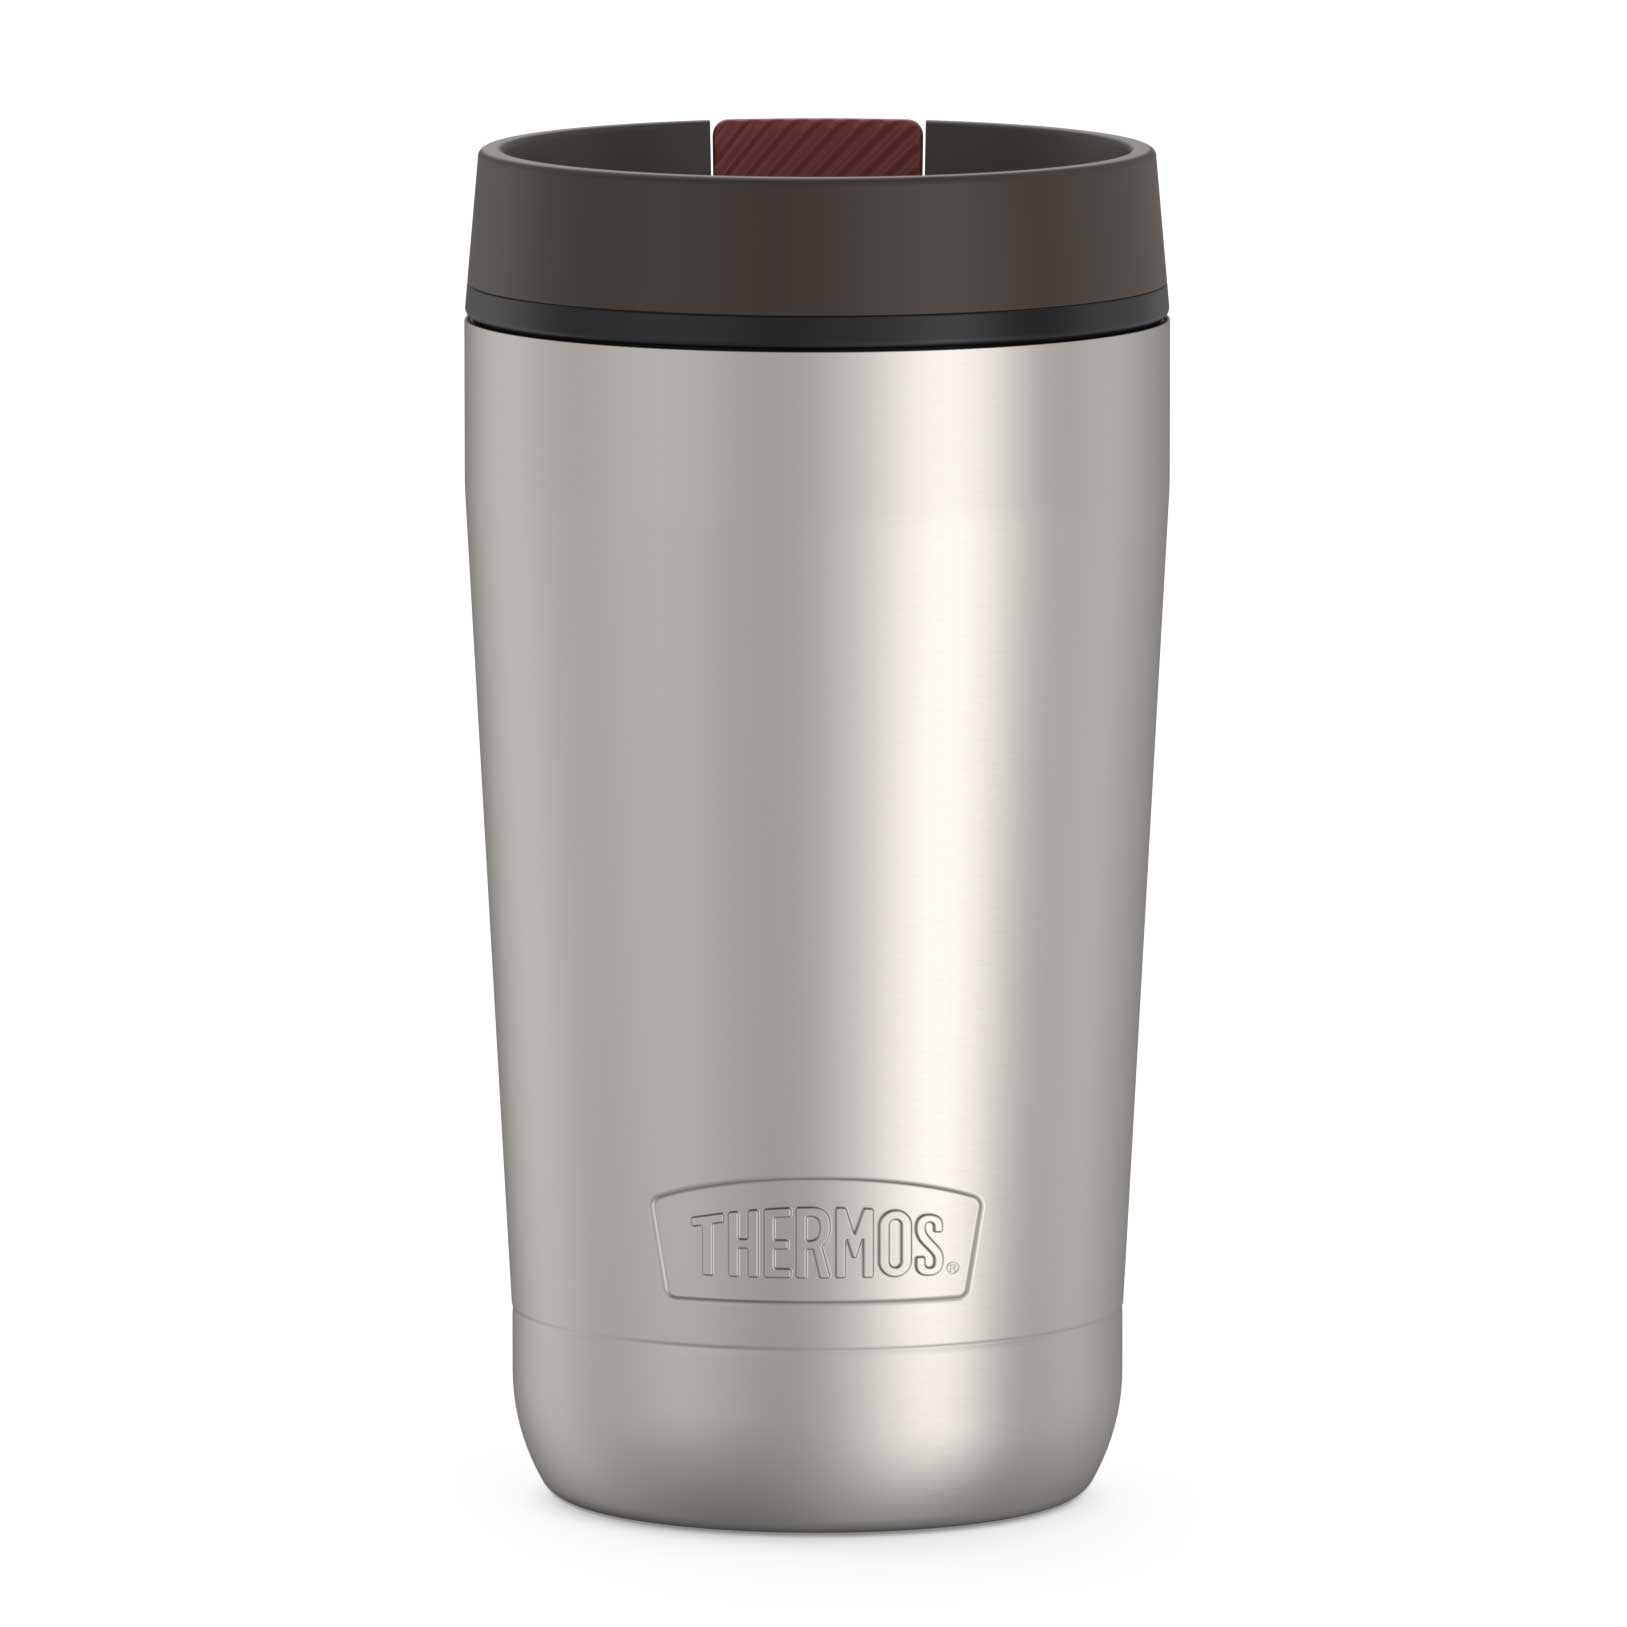 Thermos 12 Oz. Vacuum Insulated Stainless Steel Tumbler - Smoke